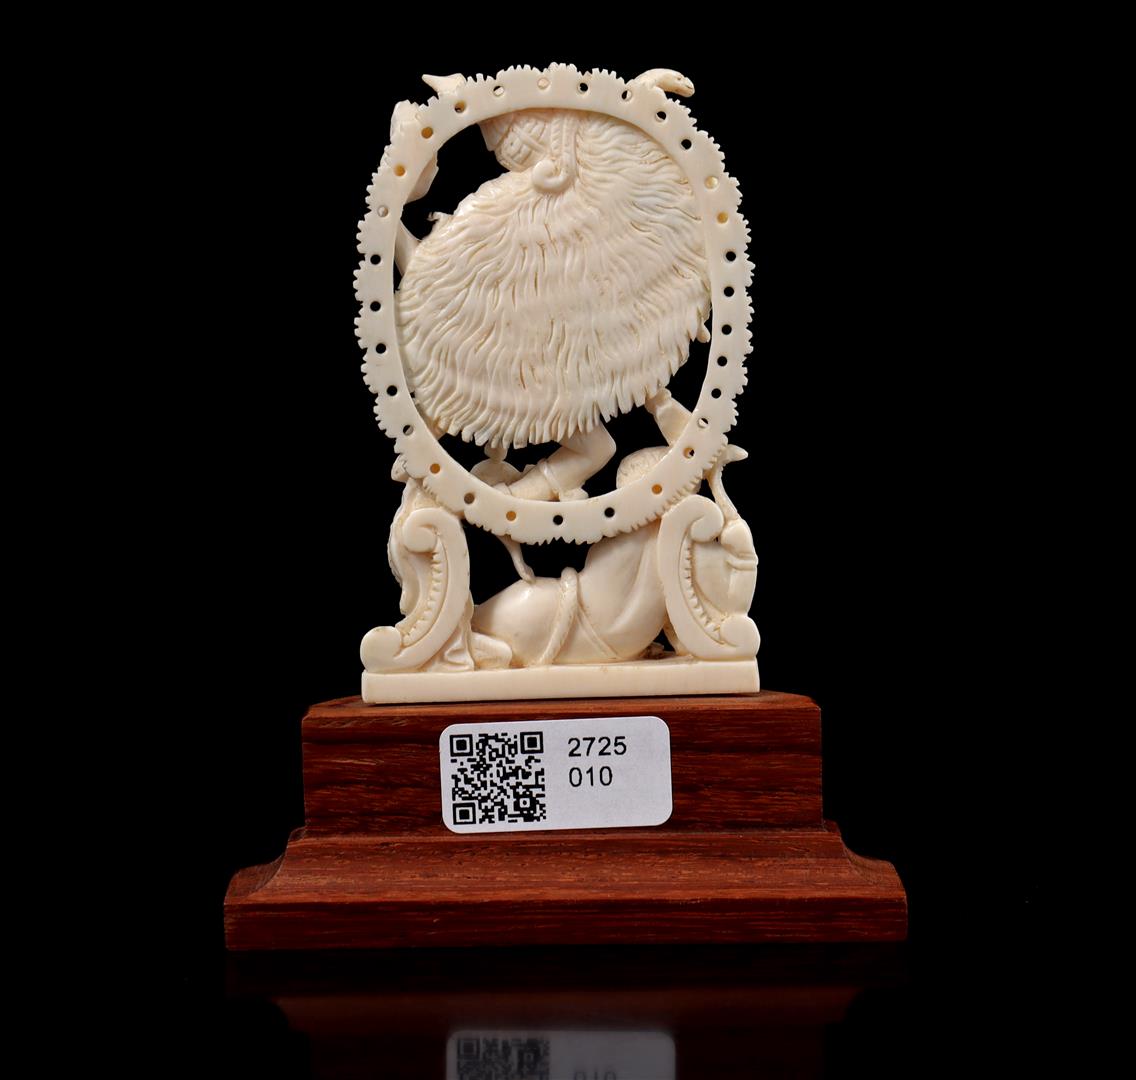 Ivory carving with fantasy figures, India ca.1925, 10x7x3 cm, 41.8 grams. With certificate - Image 2 of 2